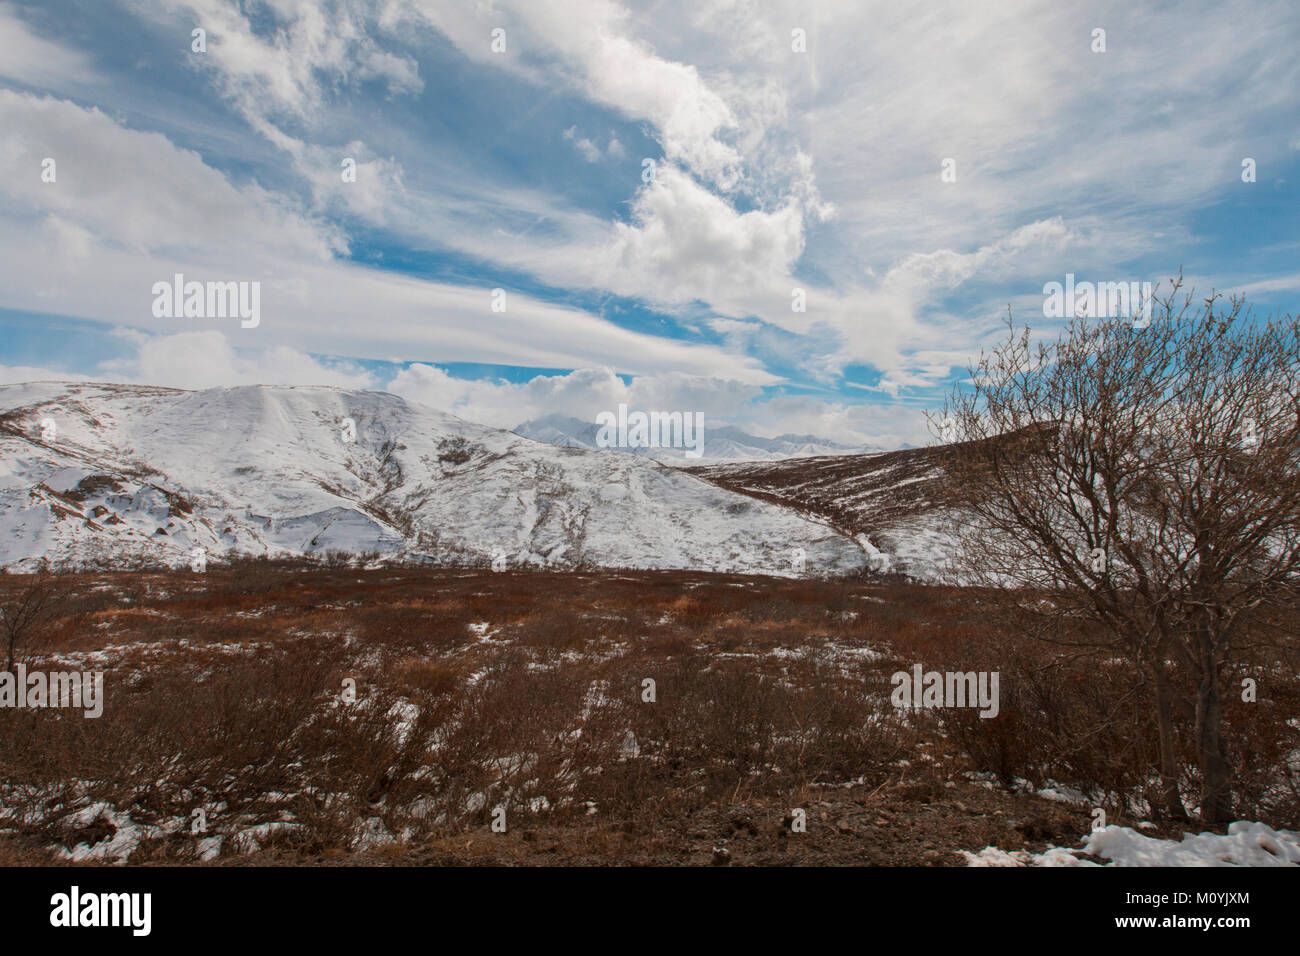 Clouds over snow on mountain Stock Photo